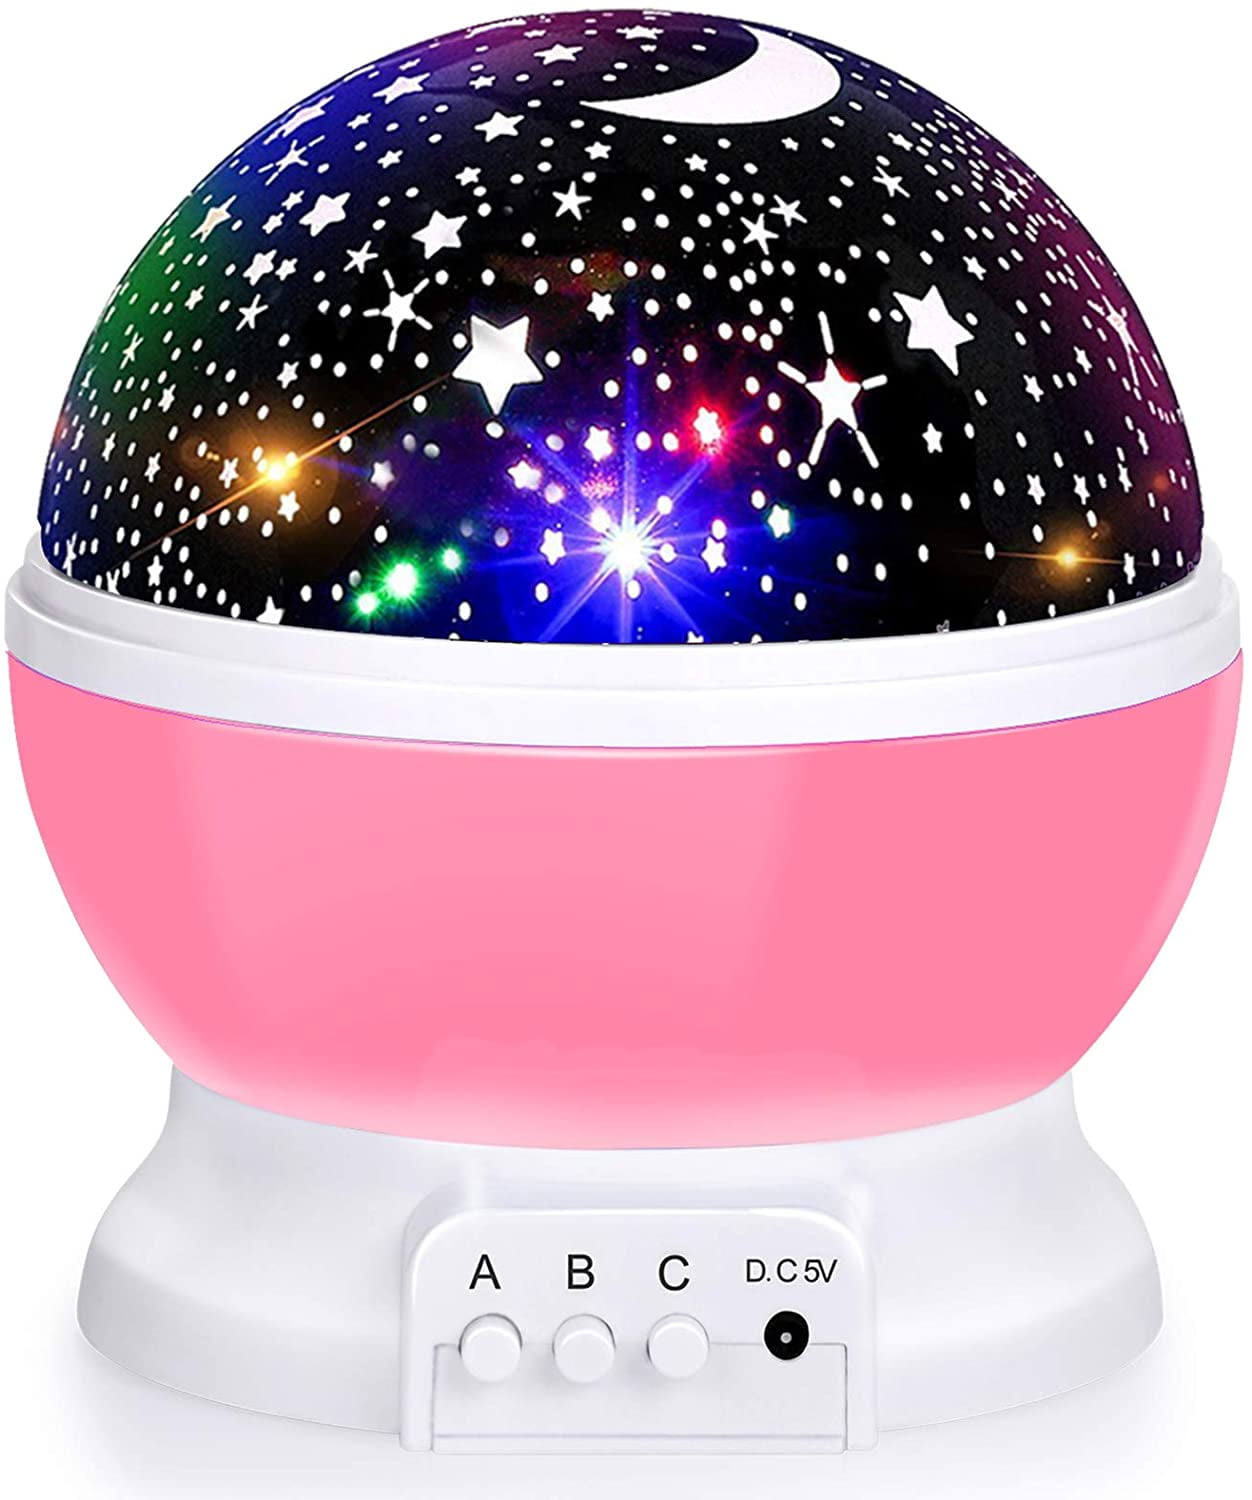 Baby Toys Funny Gifts Toyze Star Night Light Projector for Kids